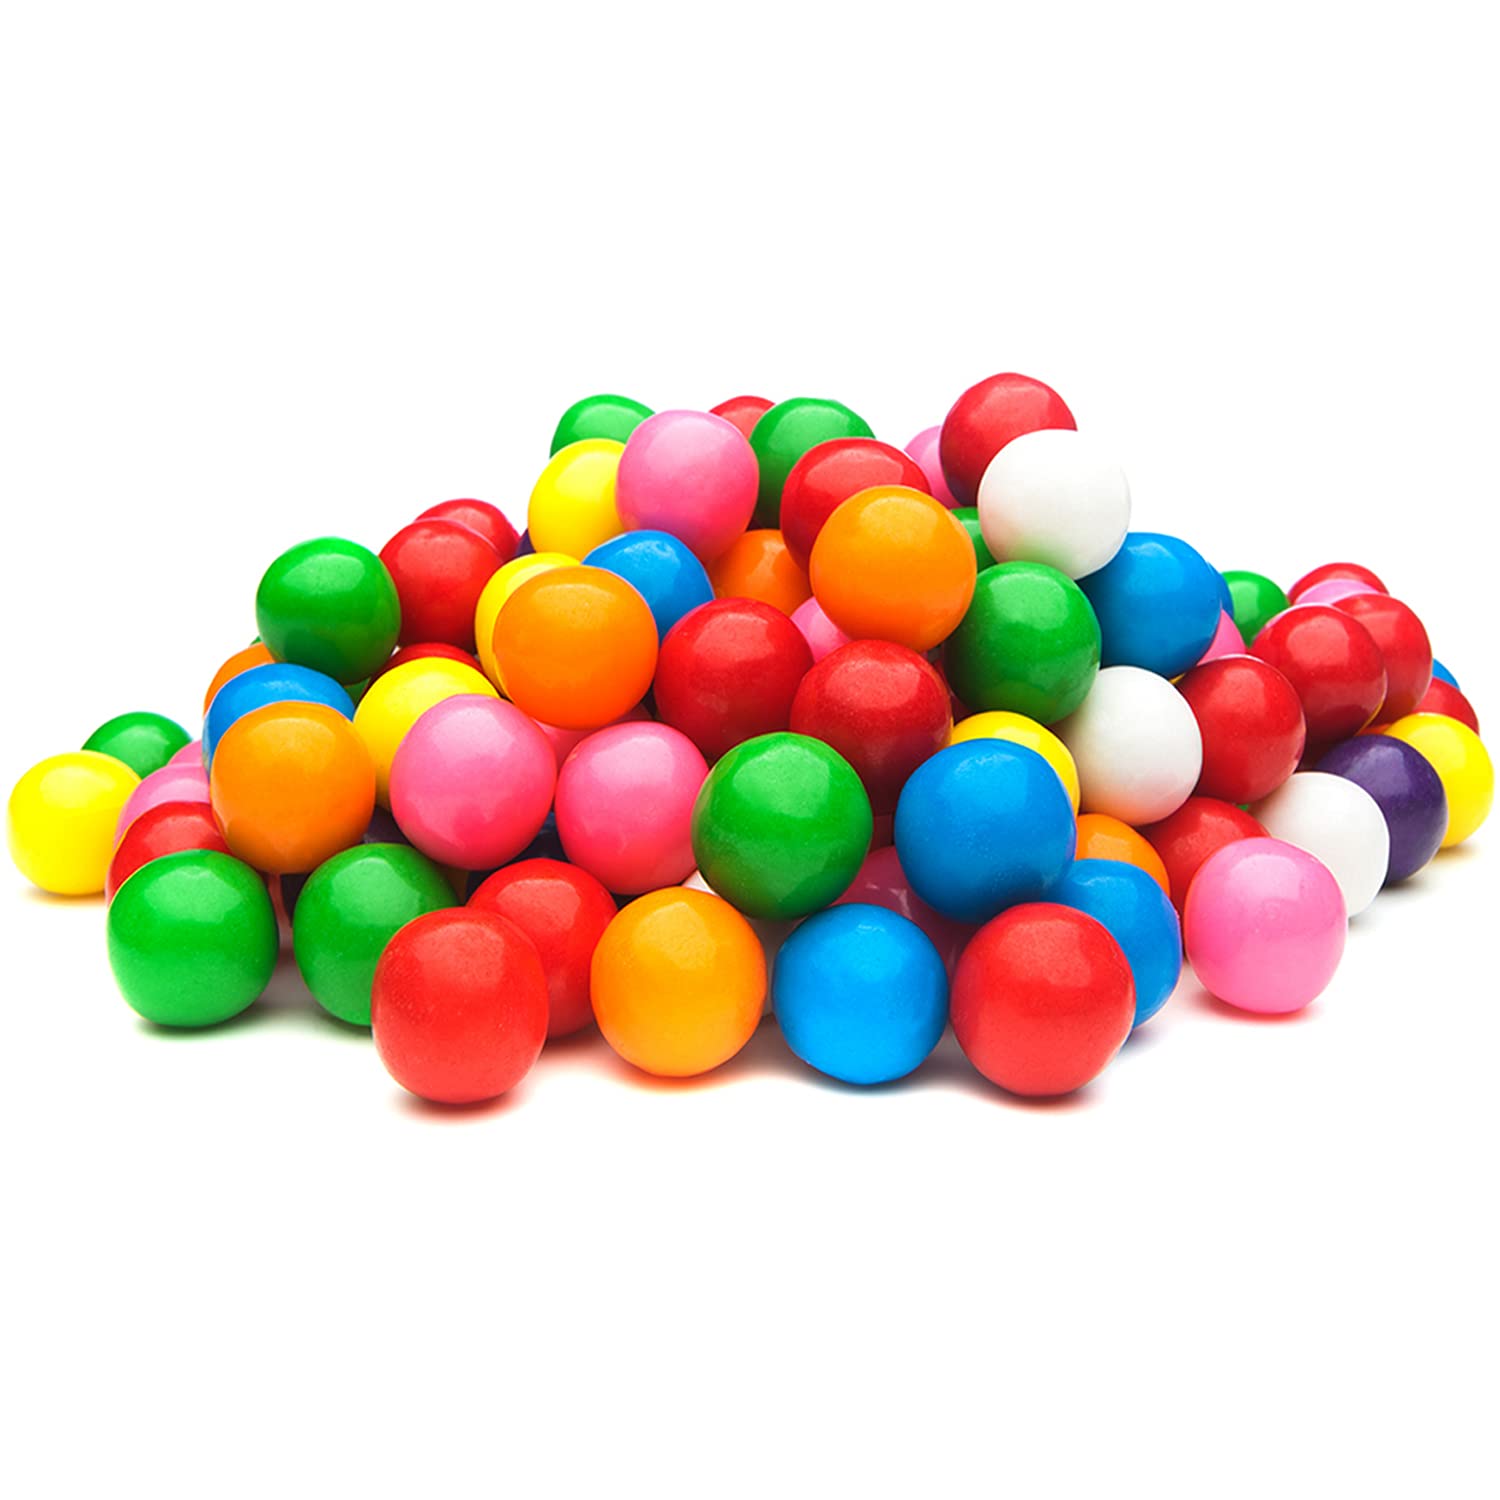 Gumballs for Gumball Machines - Apx. 620 Rainbow Gumballs - 2 Pounds -  Gumballs Refill - Mini Gumballs 1/2 Inch - Bulk Candy for Candy Machine